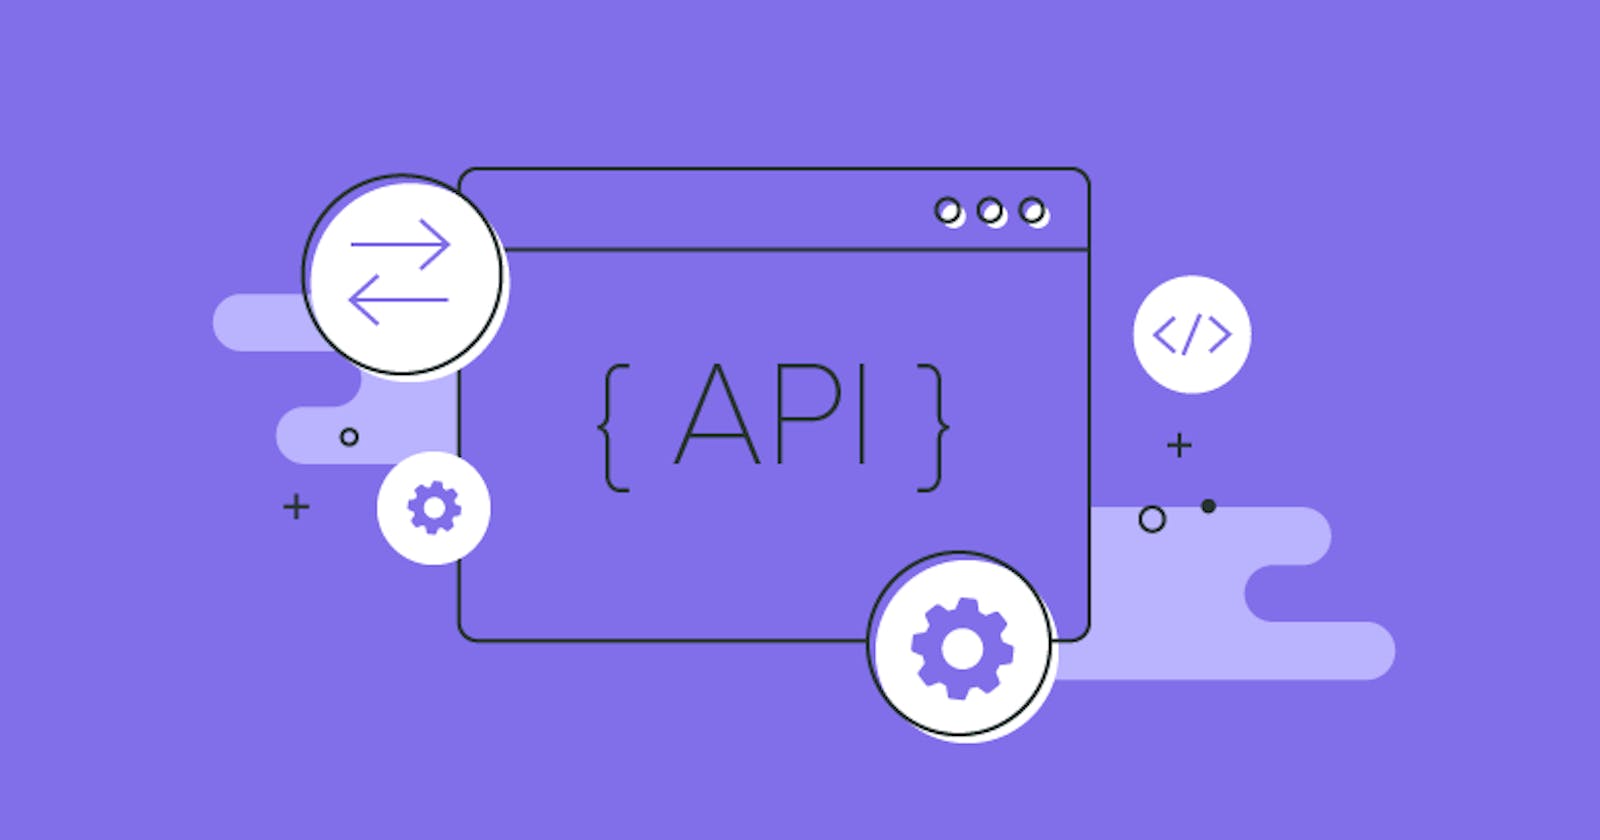 What exactly is an API?